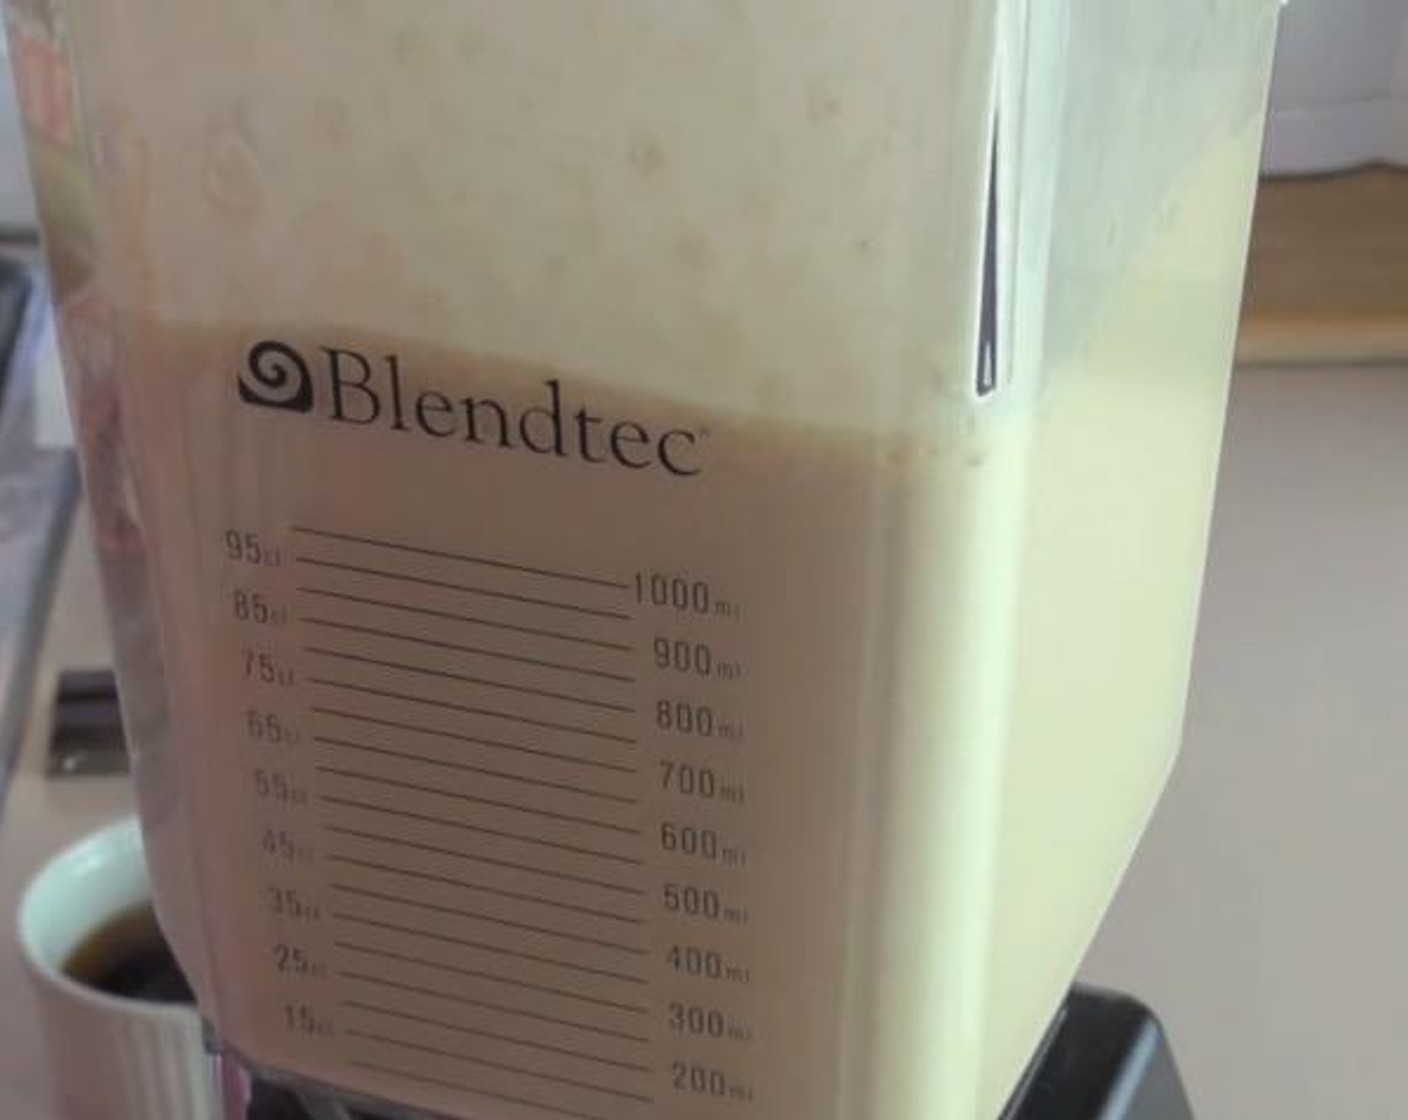 step 1 In a blender, add Coffee (2/3 cup), Milk (1 1/4 cups), Chocolate Syrup (1/4 cup), Agave Syrup (to taste) and Ice (to taste). Blend until smooth.